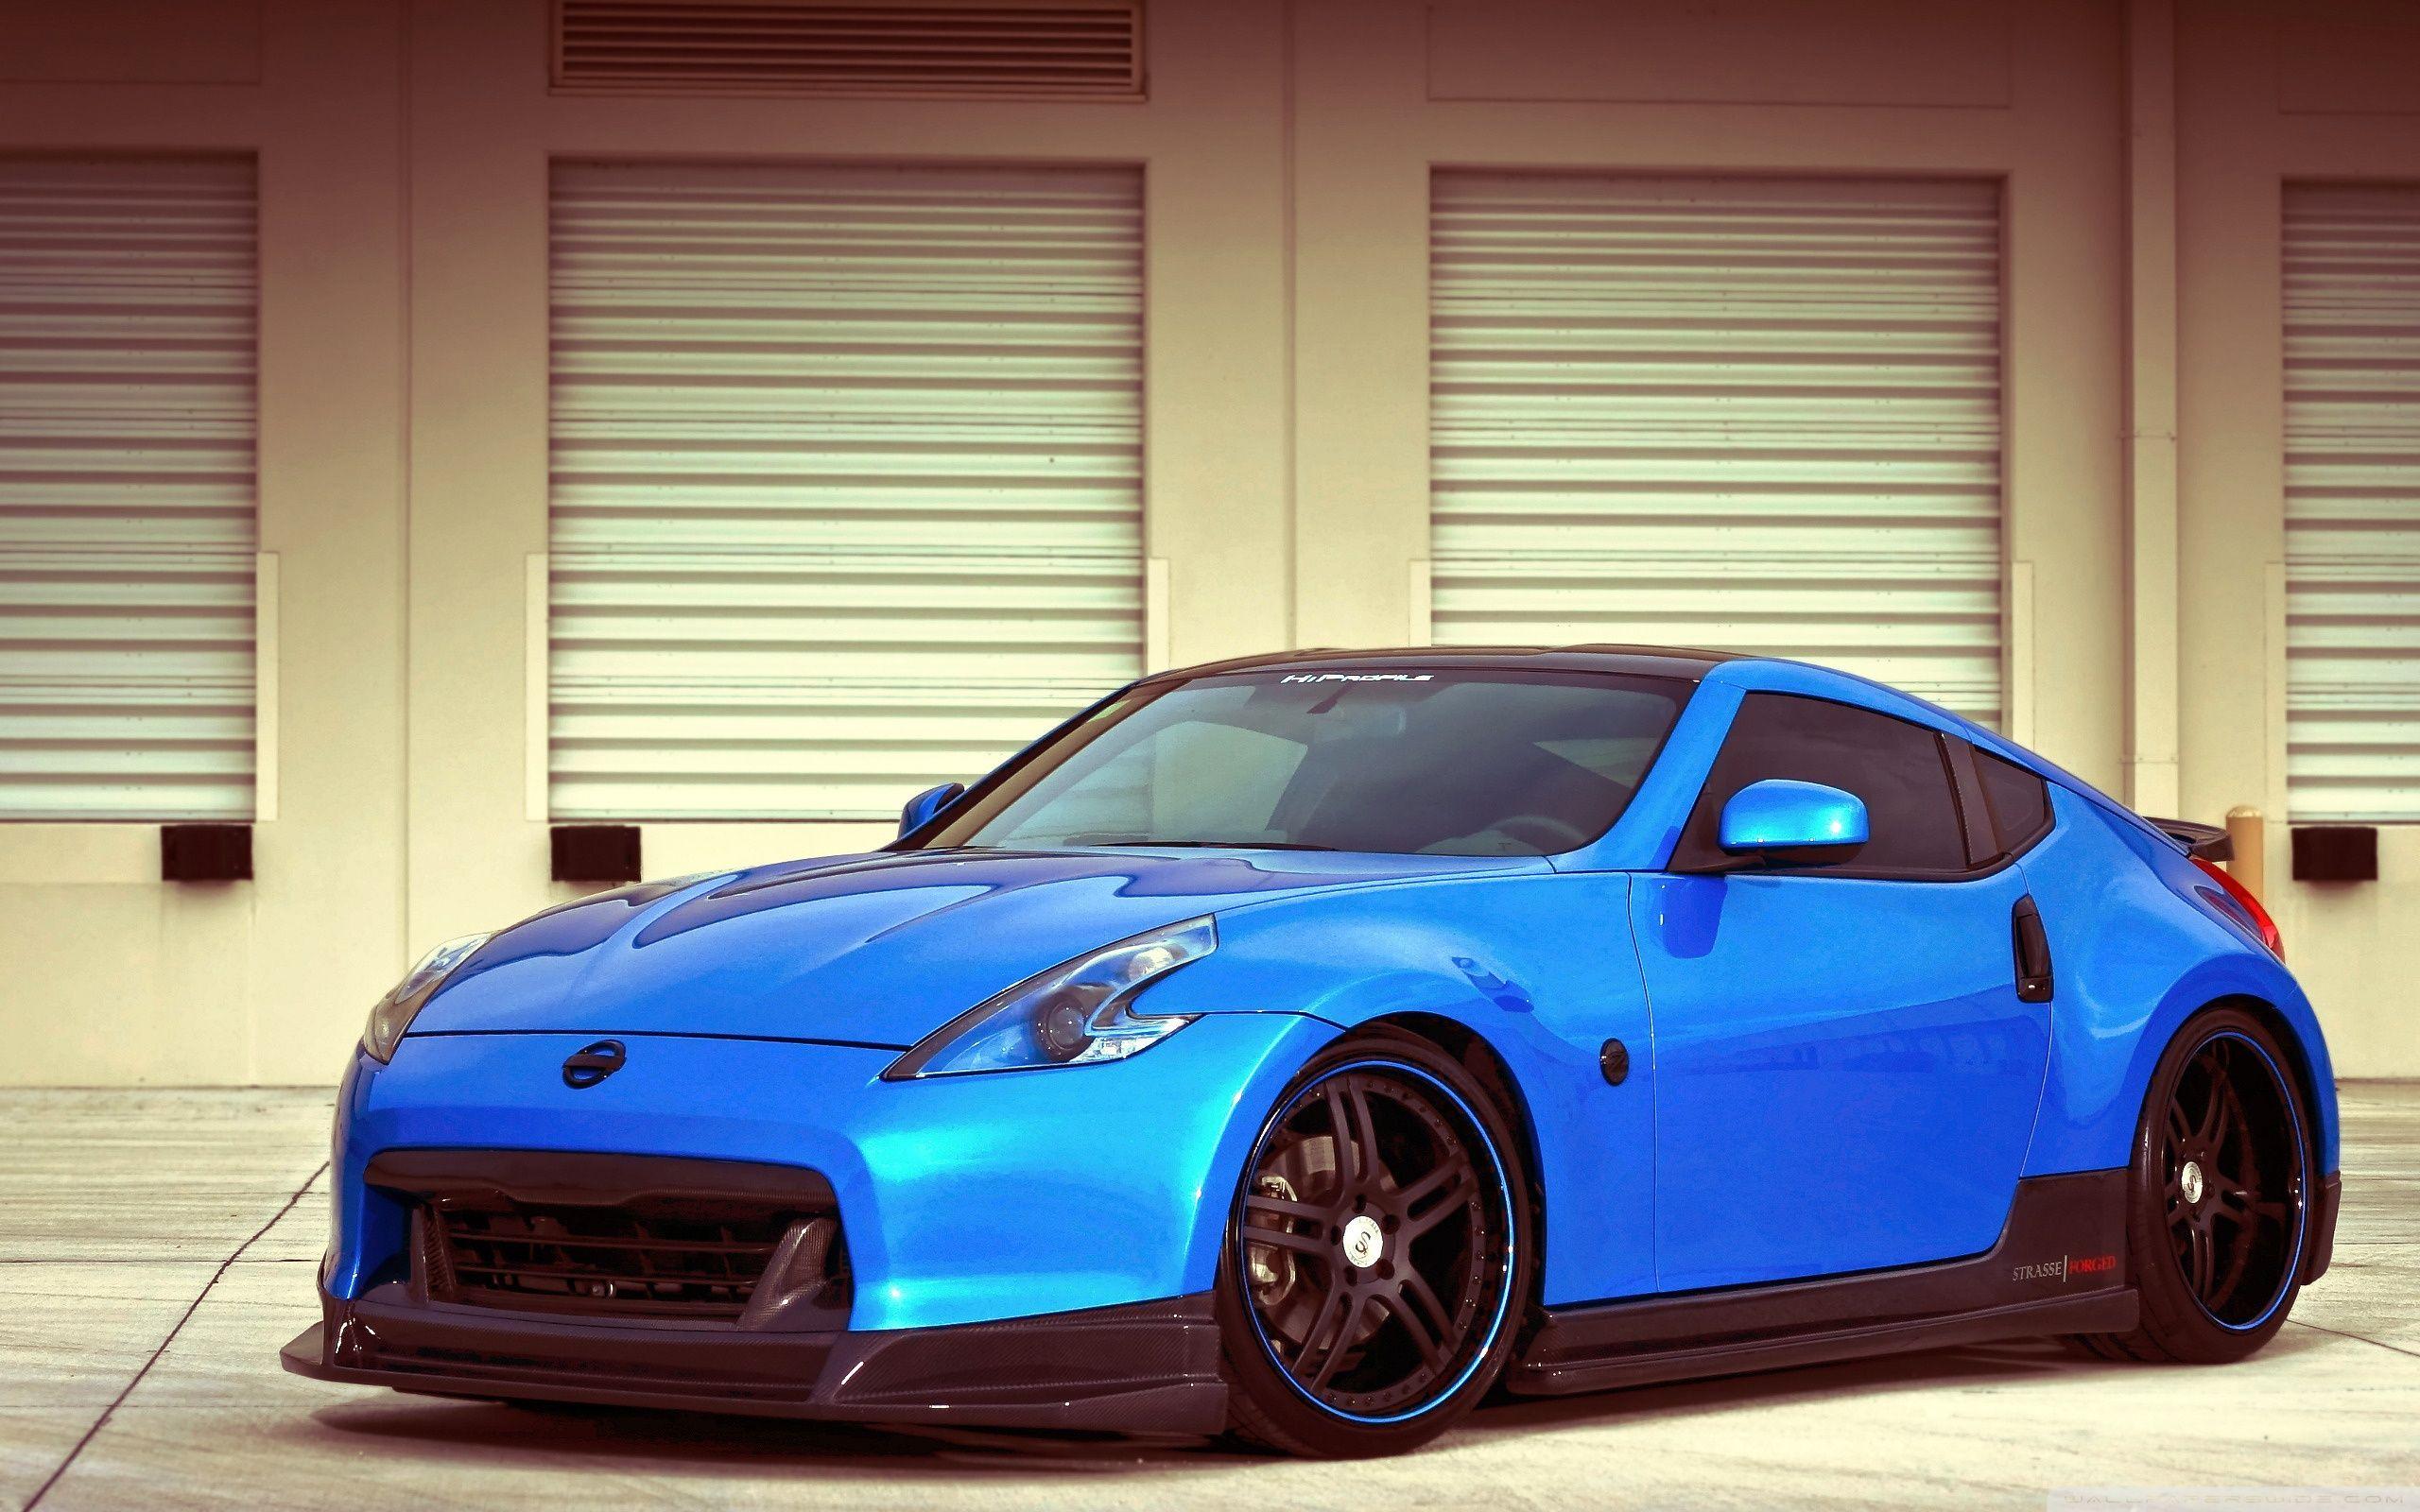 Nissan 370z Wallpapers Top Free Nissan 370z Backgrounds Images, Photos, Reviews